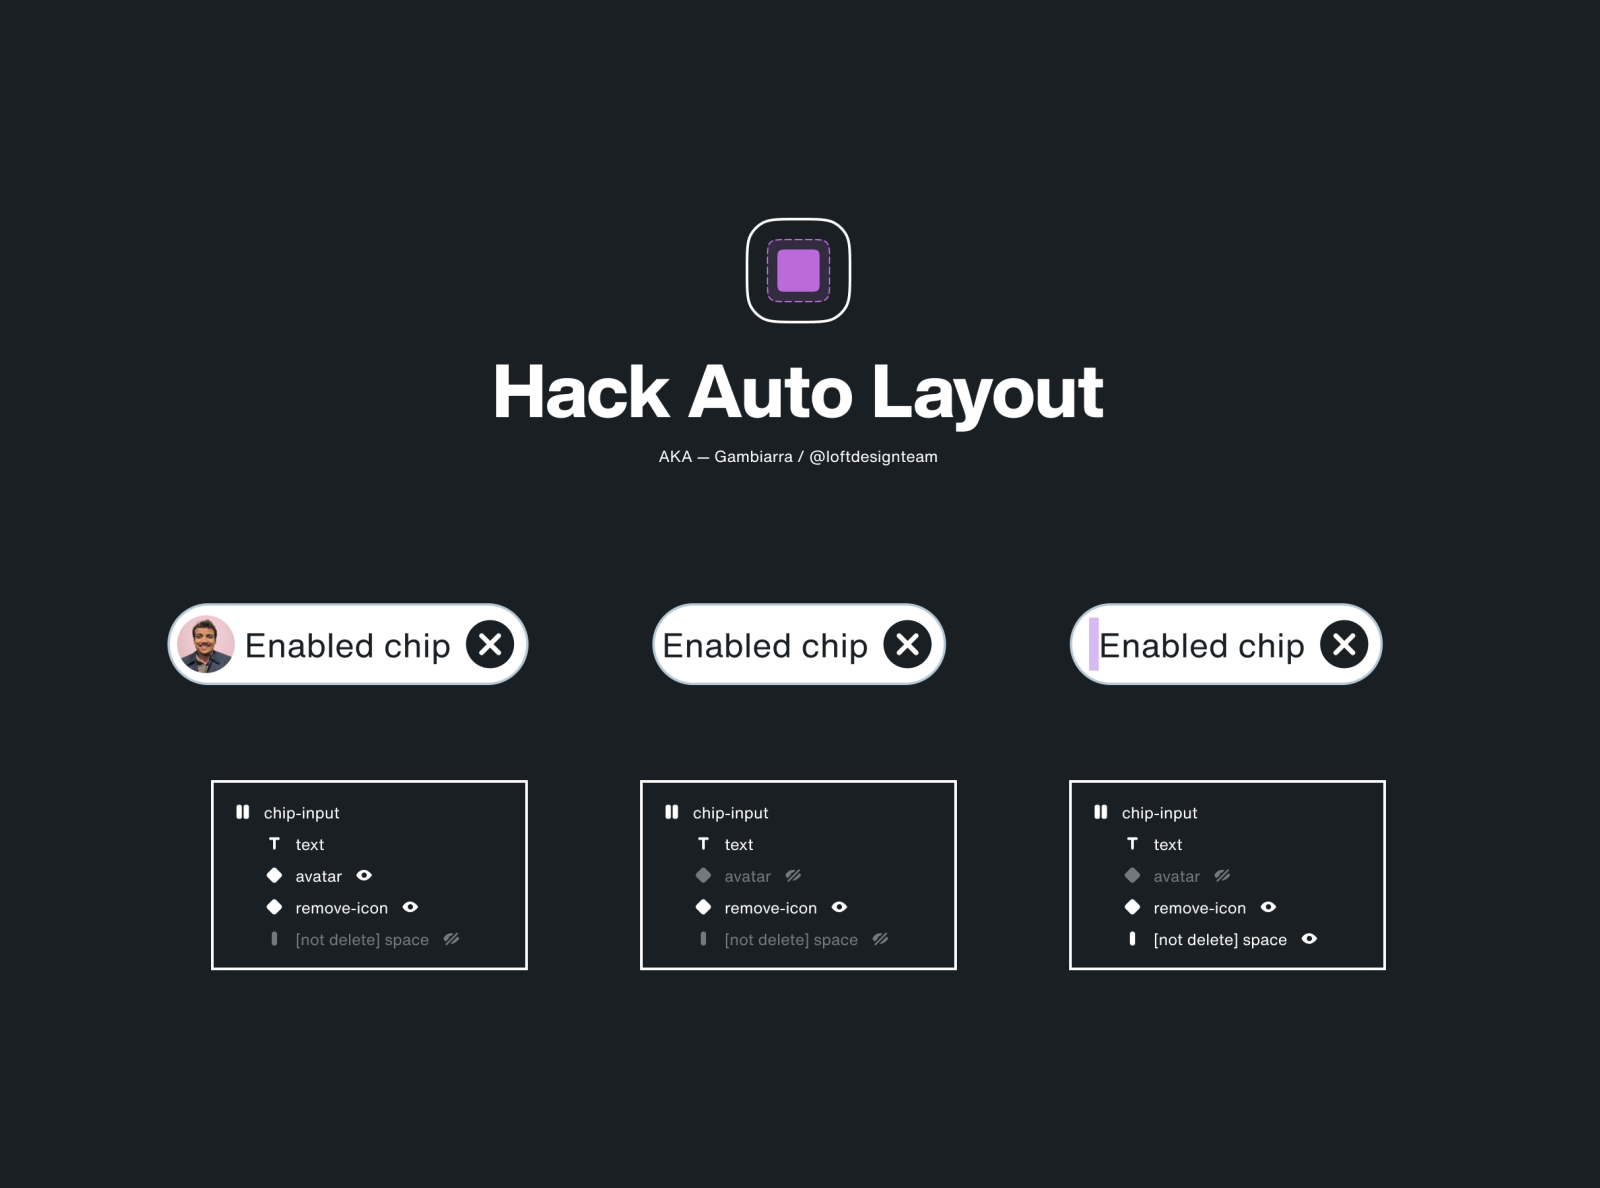 Hack Auto Layout / Figma by Diogo Kpelo on Dribbble